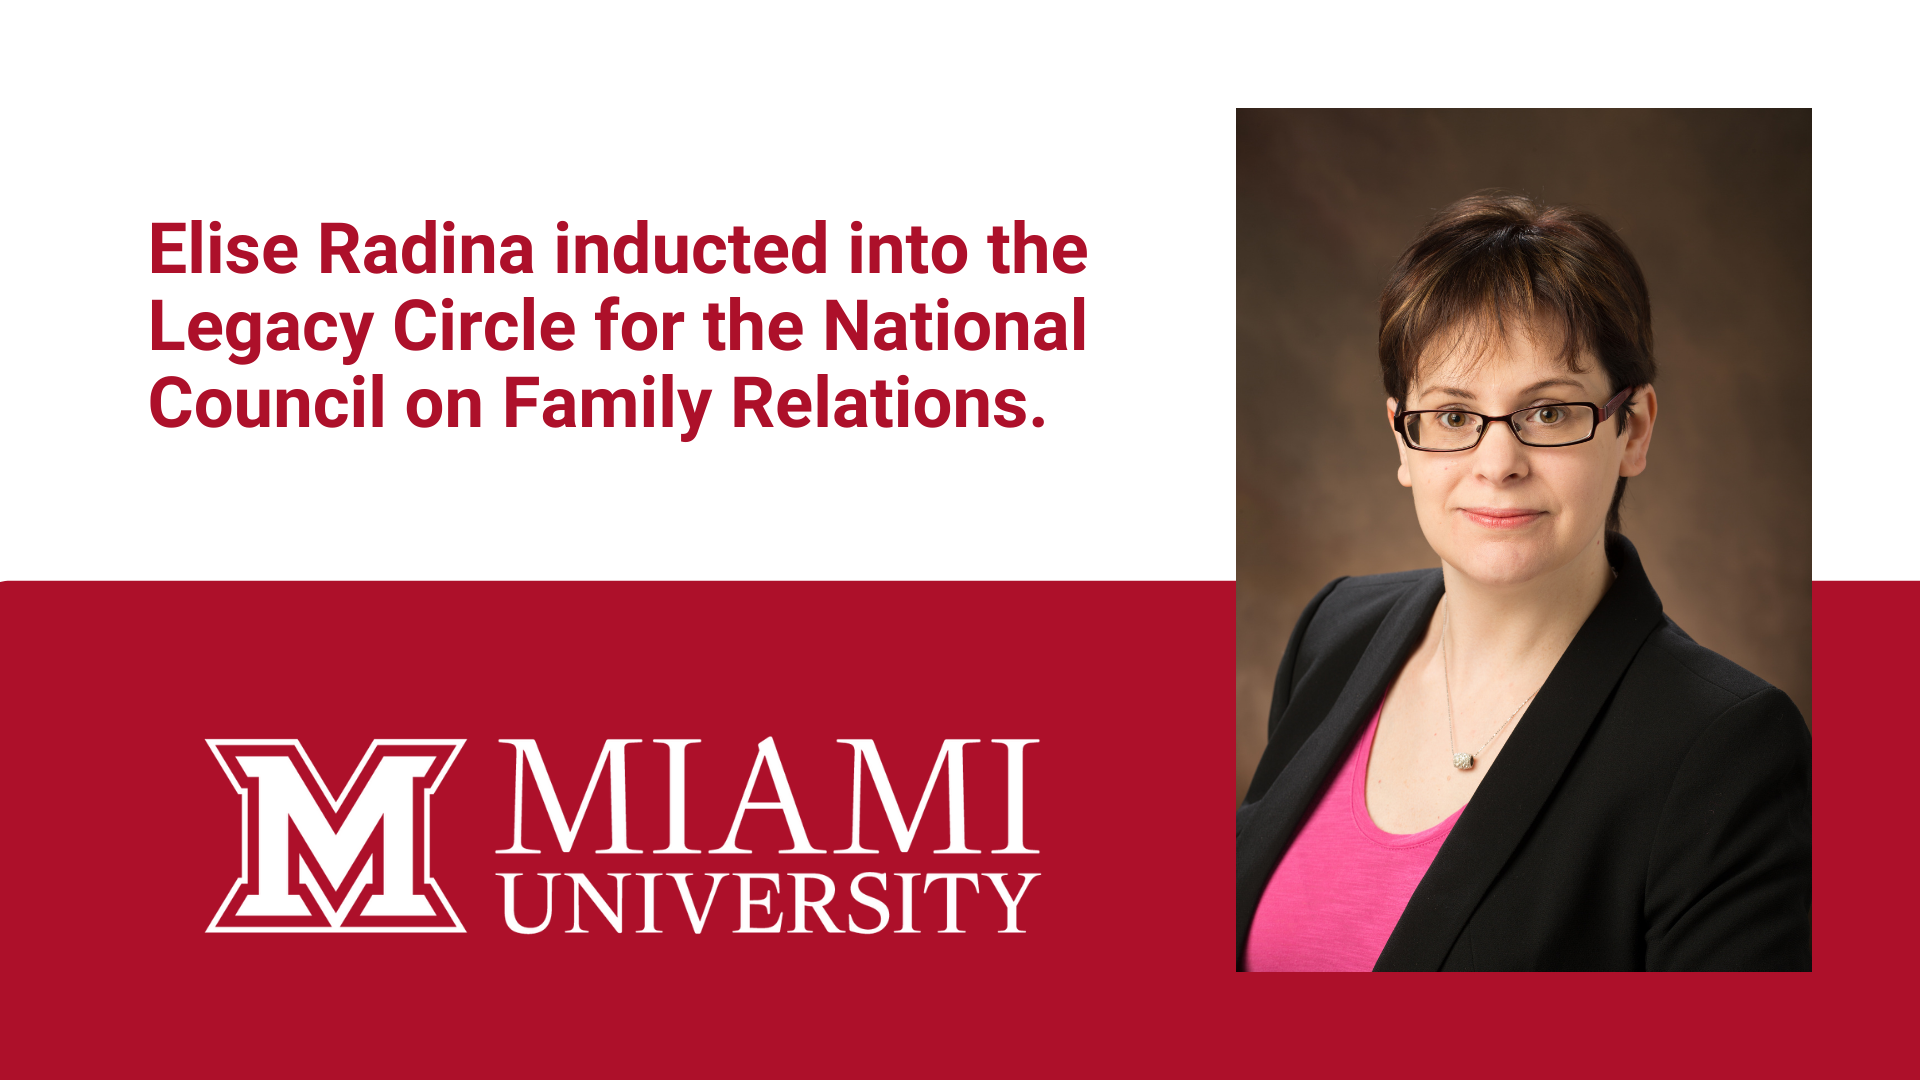 Elise Radina inducted into the Legacy Circle for the National Council on Family Relations.